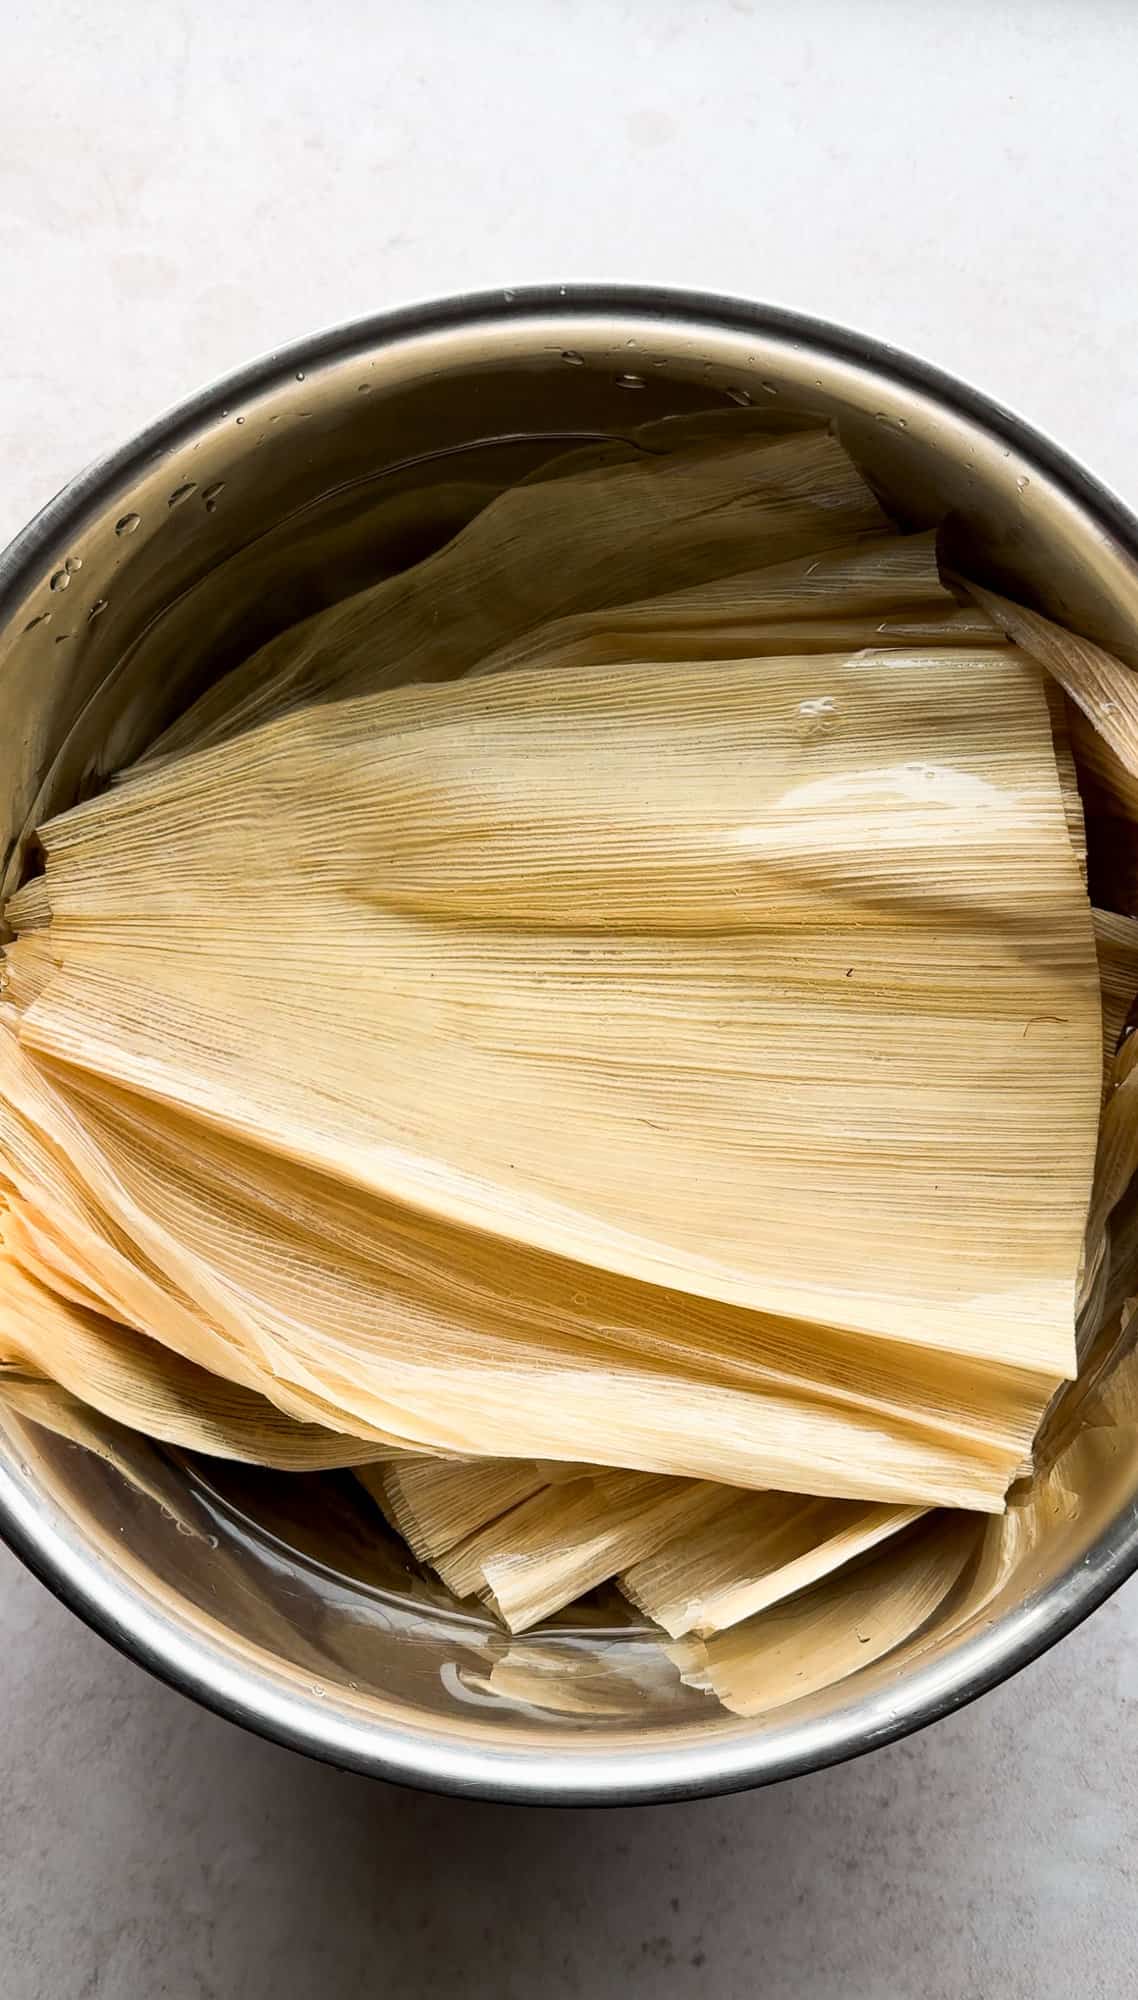 Corn husks in a bowl of water being softened for tamales.